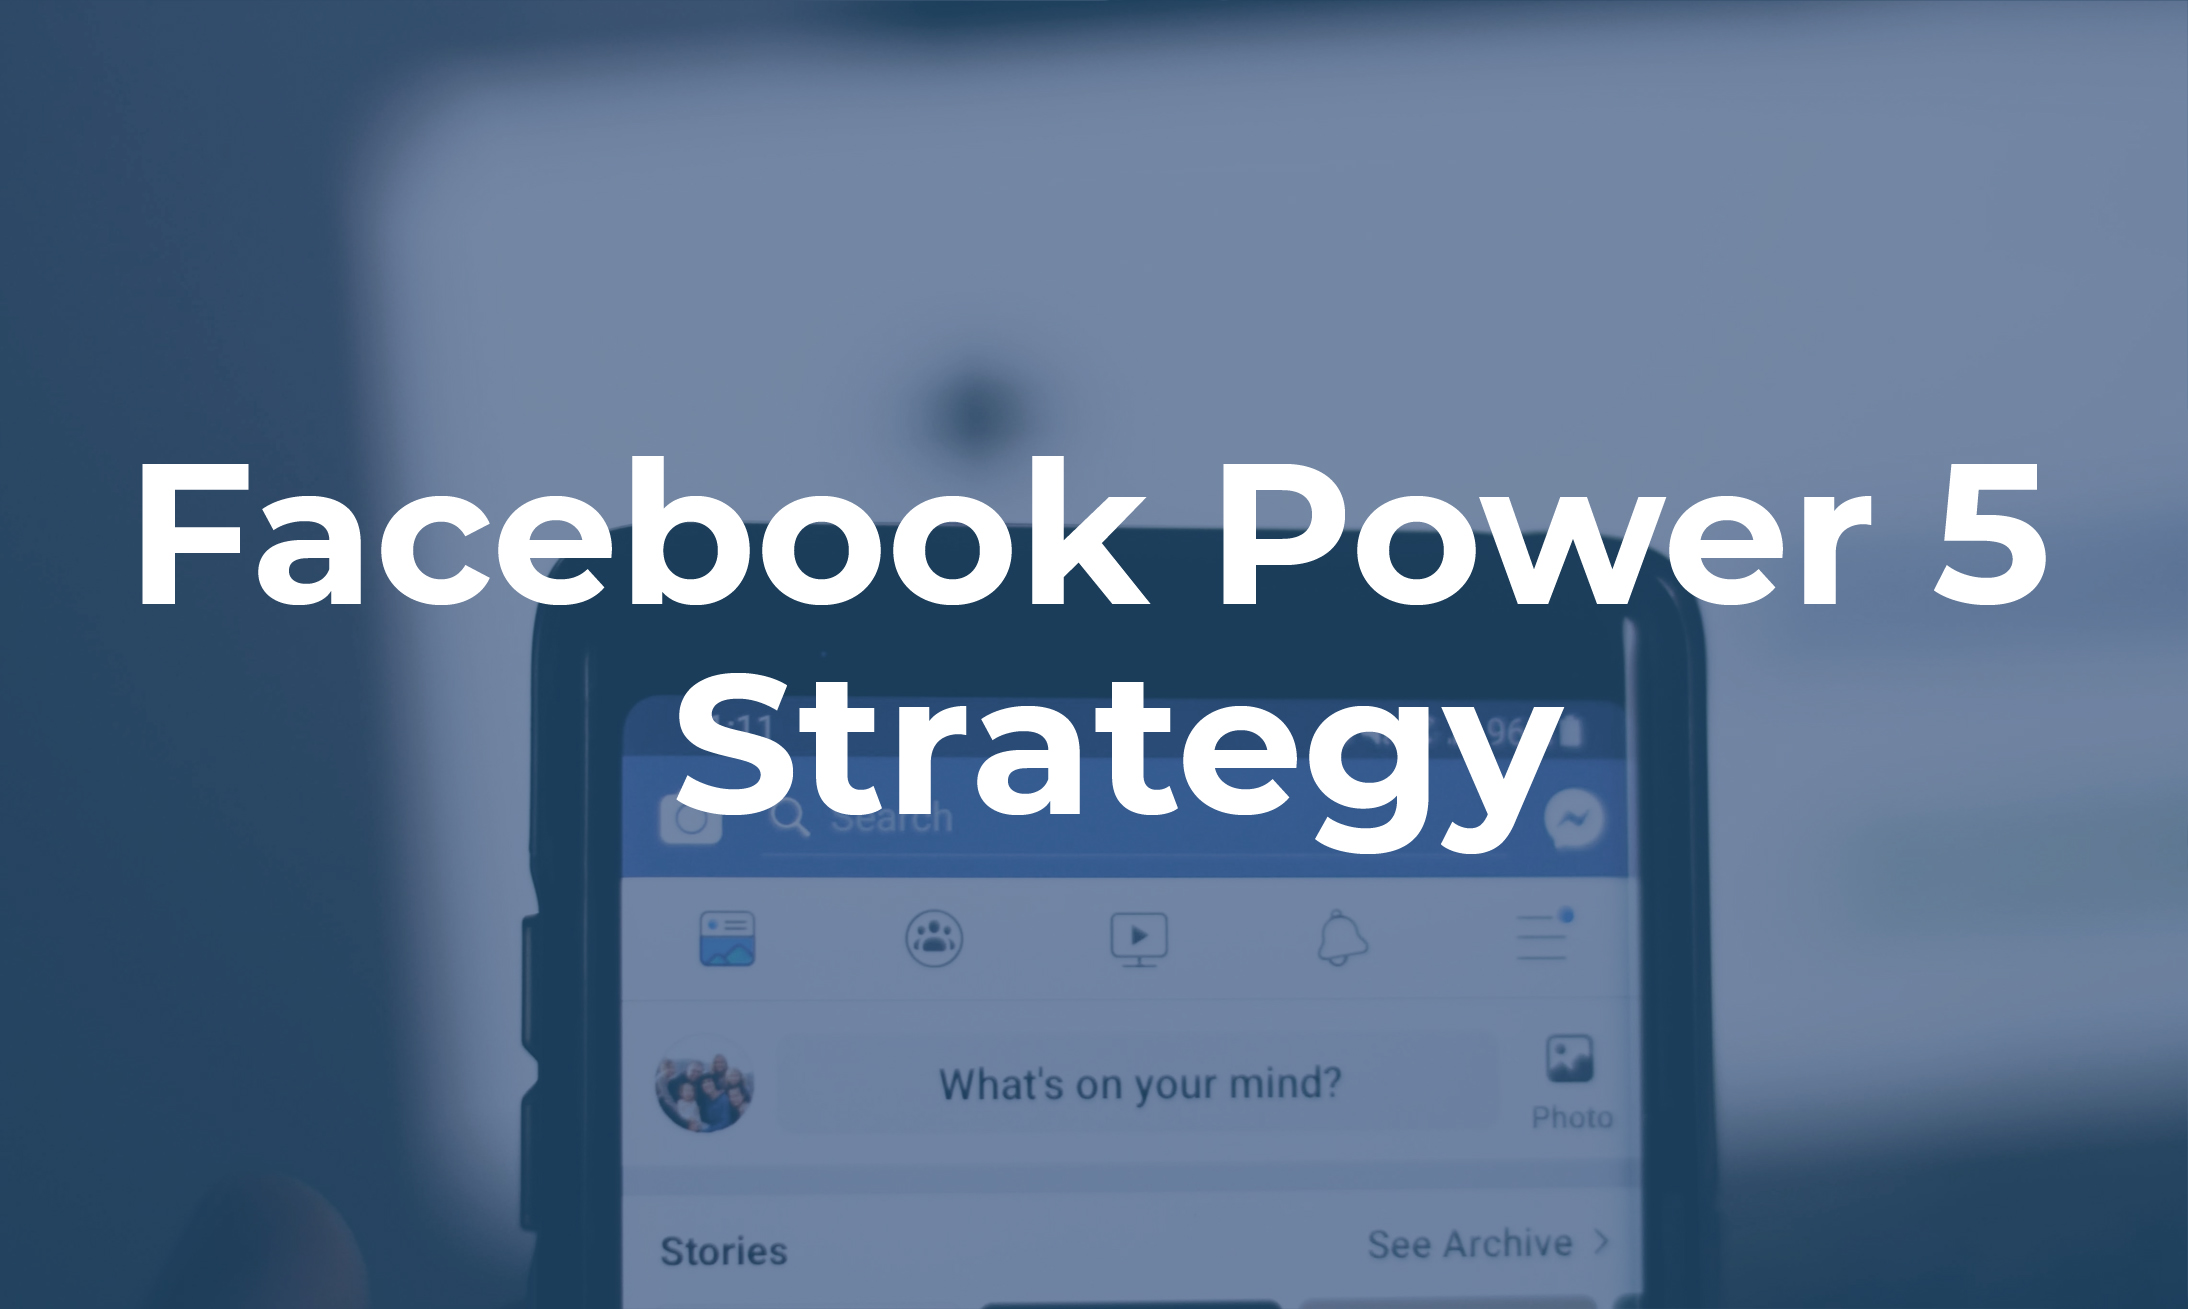 Facebook Power 5 Strategy